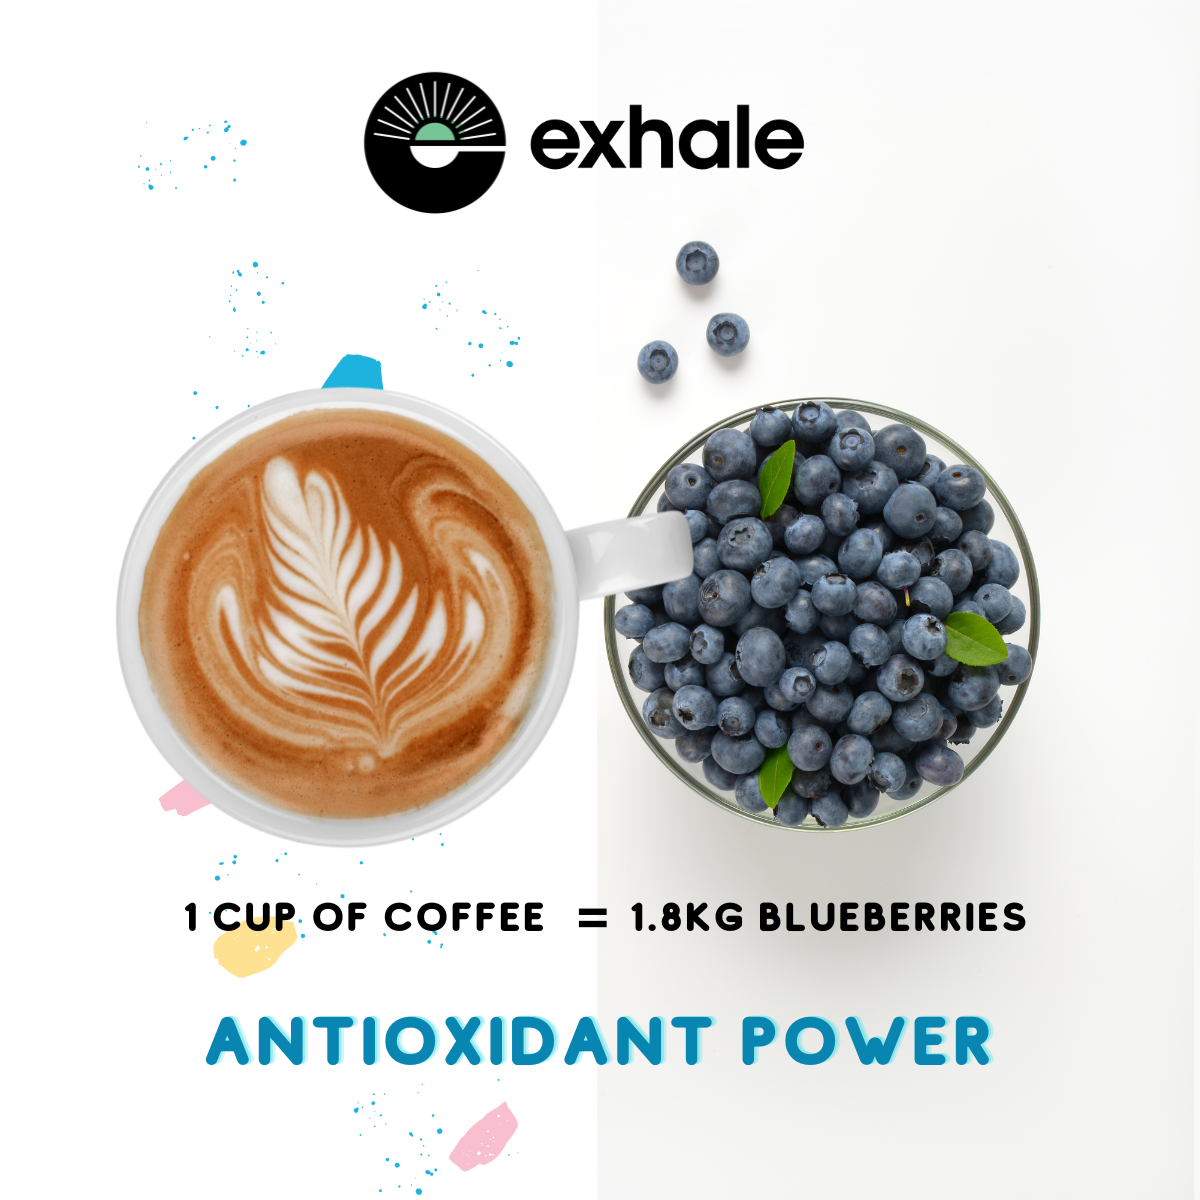 I. Introduction to Blueberries as an Antioxidant Powerhouse